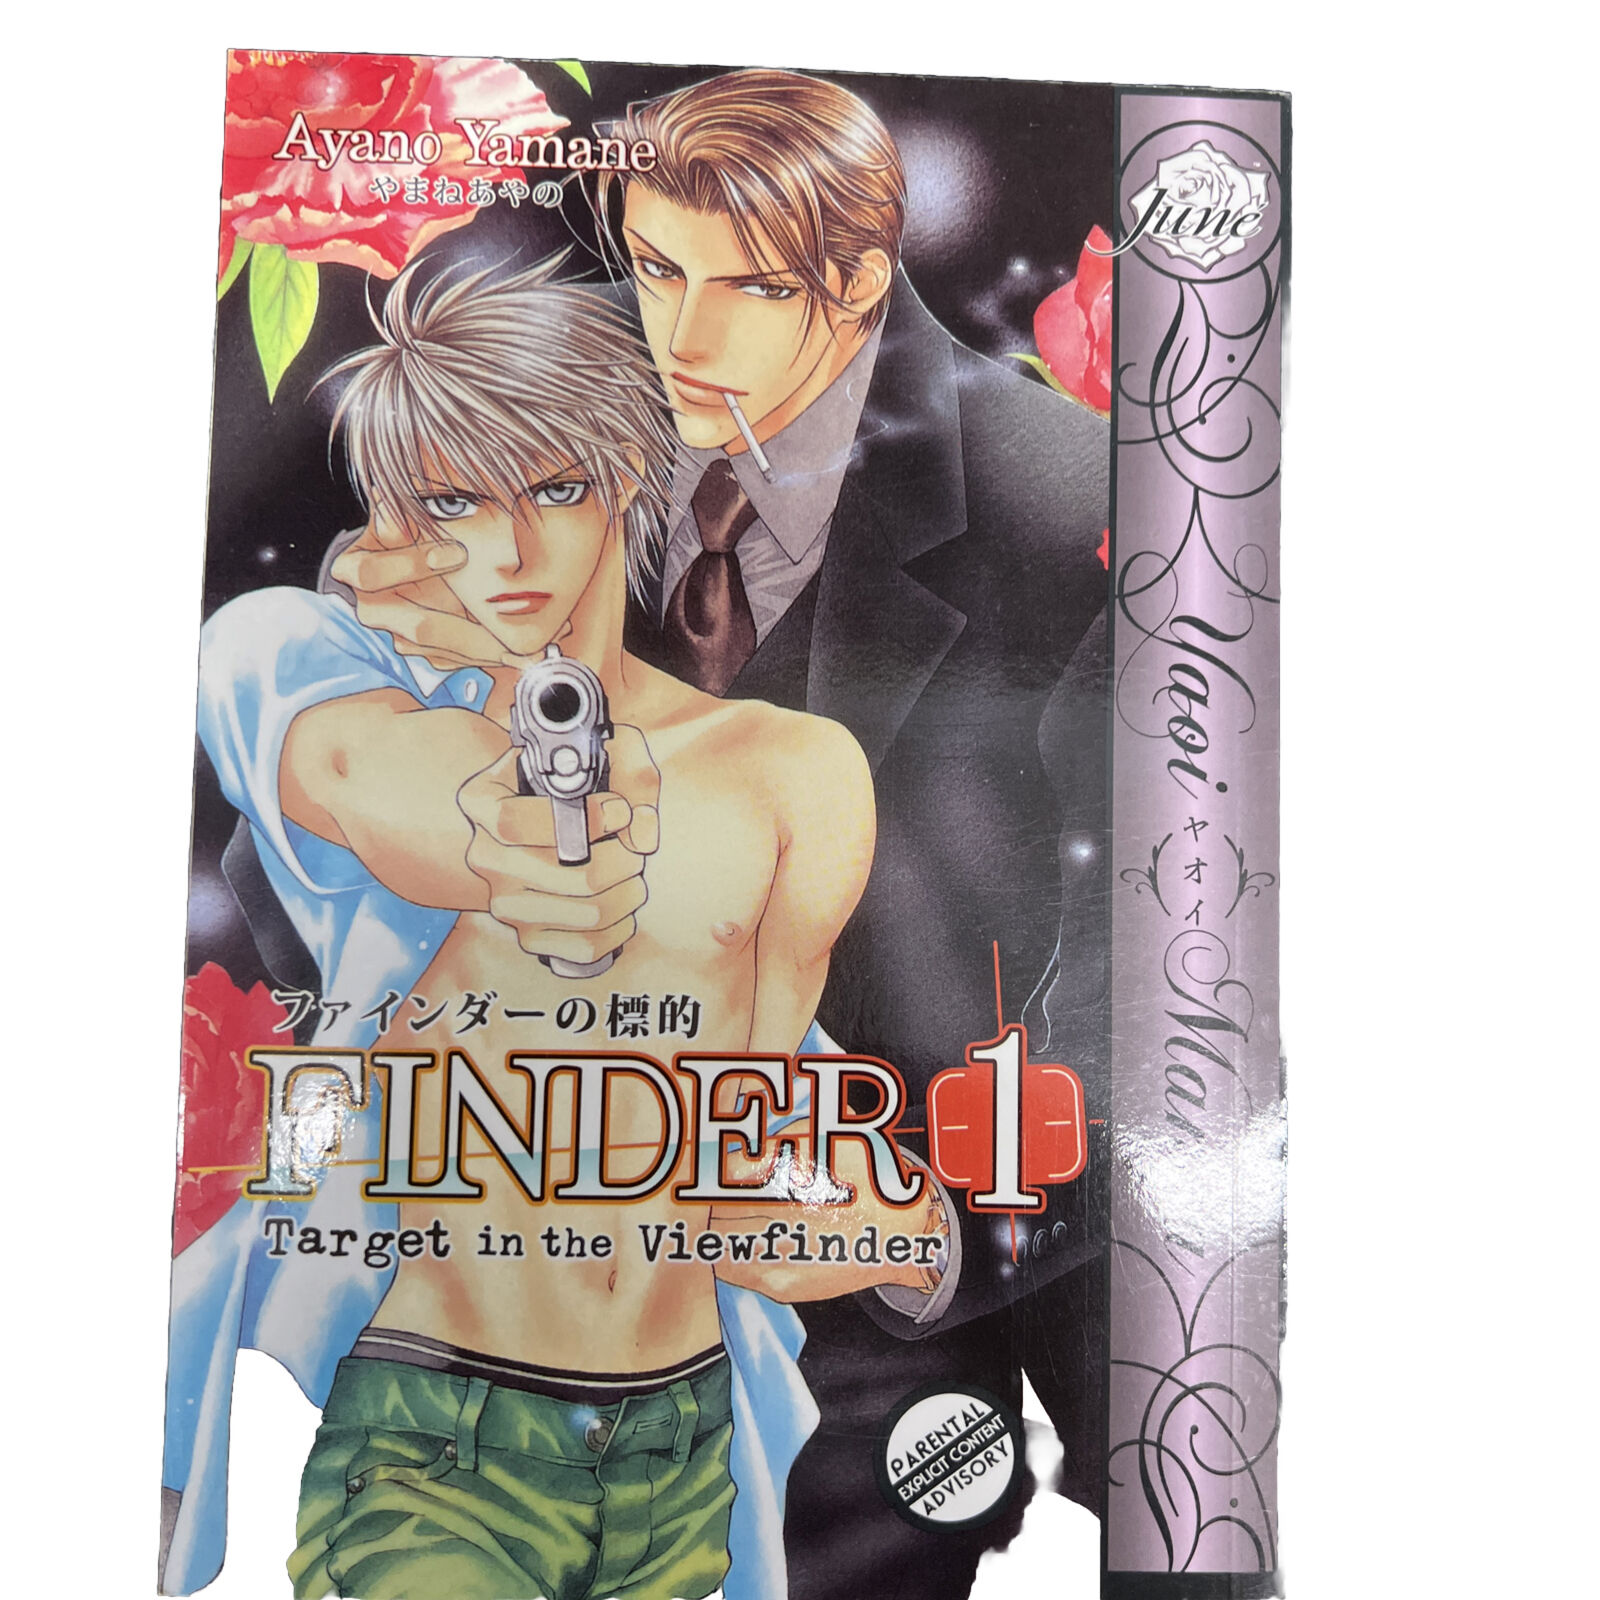 Finder Vol 1 Target in the View Finder Ayano Yamane (2010, Trade Paperback) Yaoi